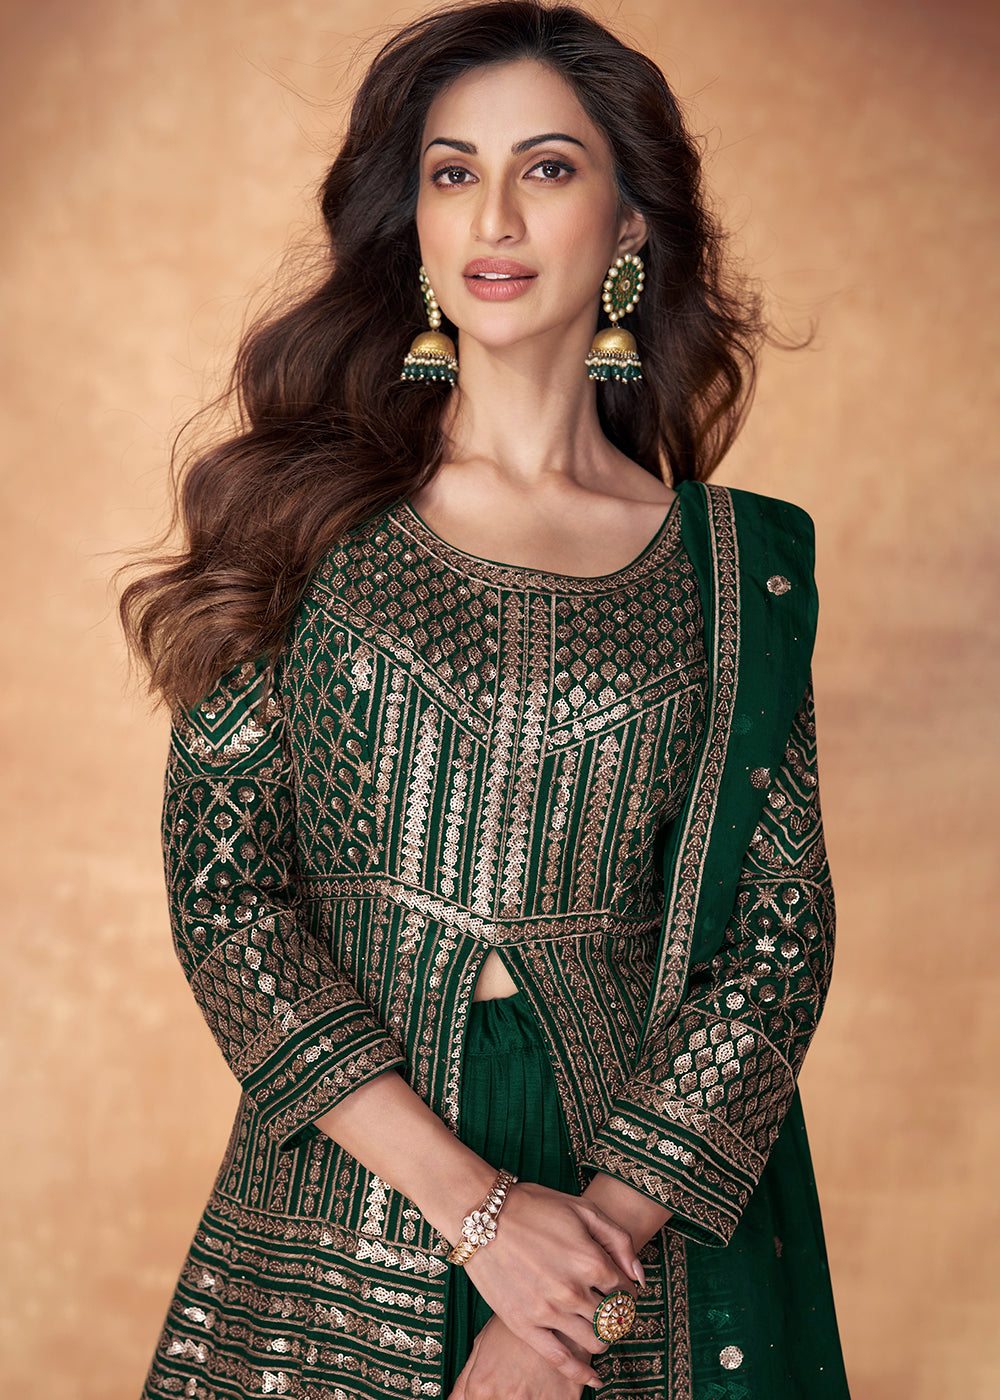 Buy Now Bottle Green Skirt Style Embroidered Wedding Anarkali Suit Online in USA, UK, Australia, New Zealand, Canada & Worldwide at Empress Clothing.